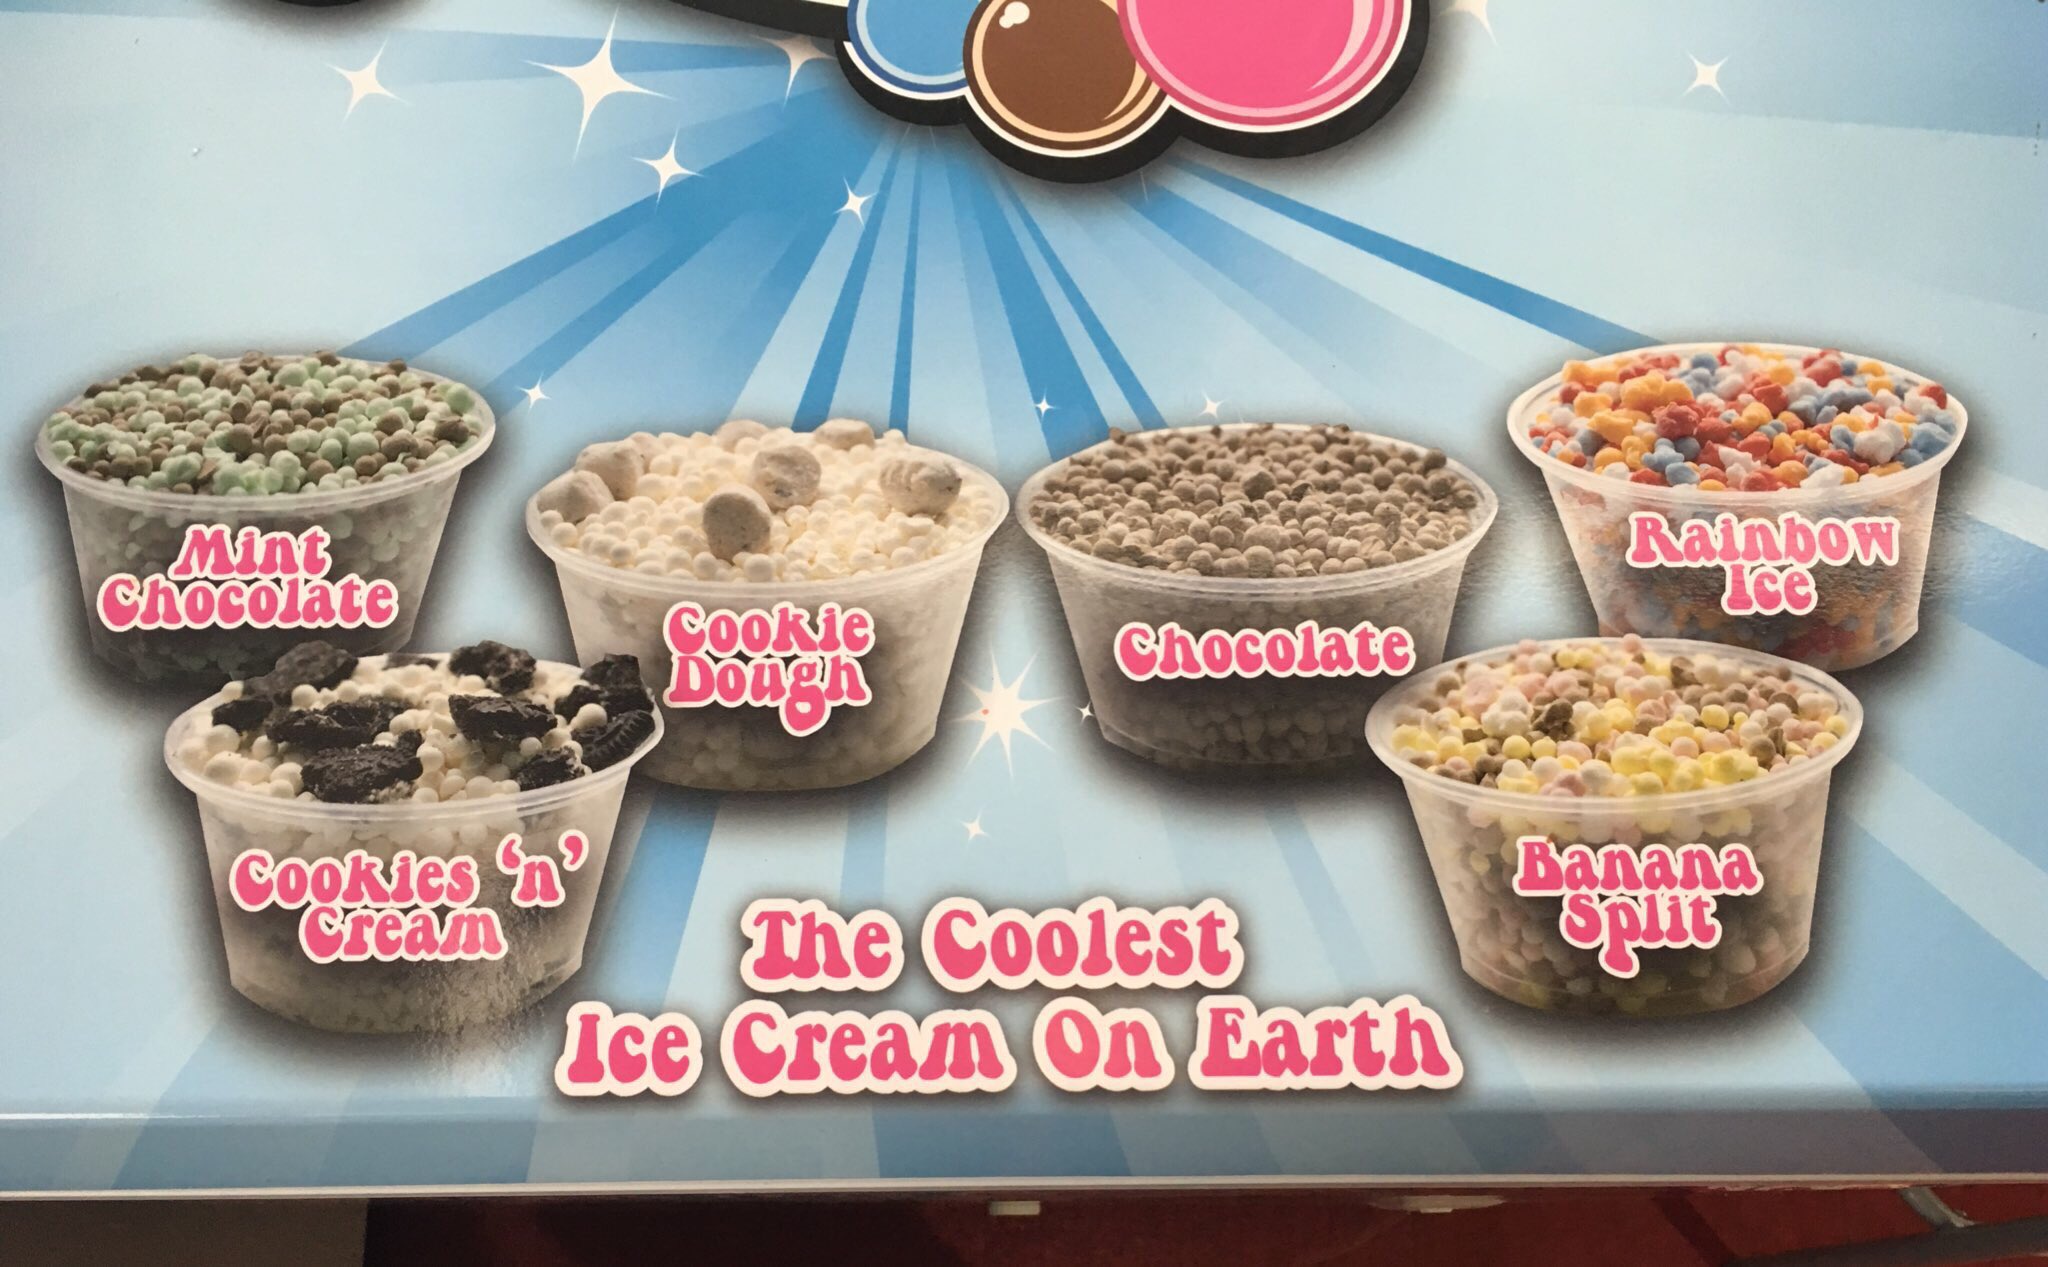 Kangaroo Zoo PG on X: We now sell Cool Beads Ice Cream for $3, stay cool  during those warmer days hopefully soon to come.  /  X